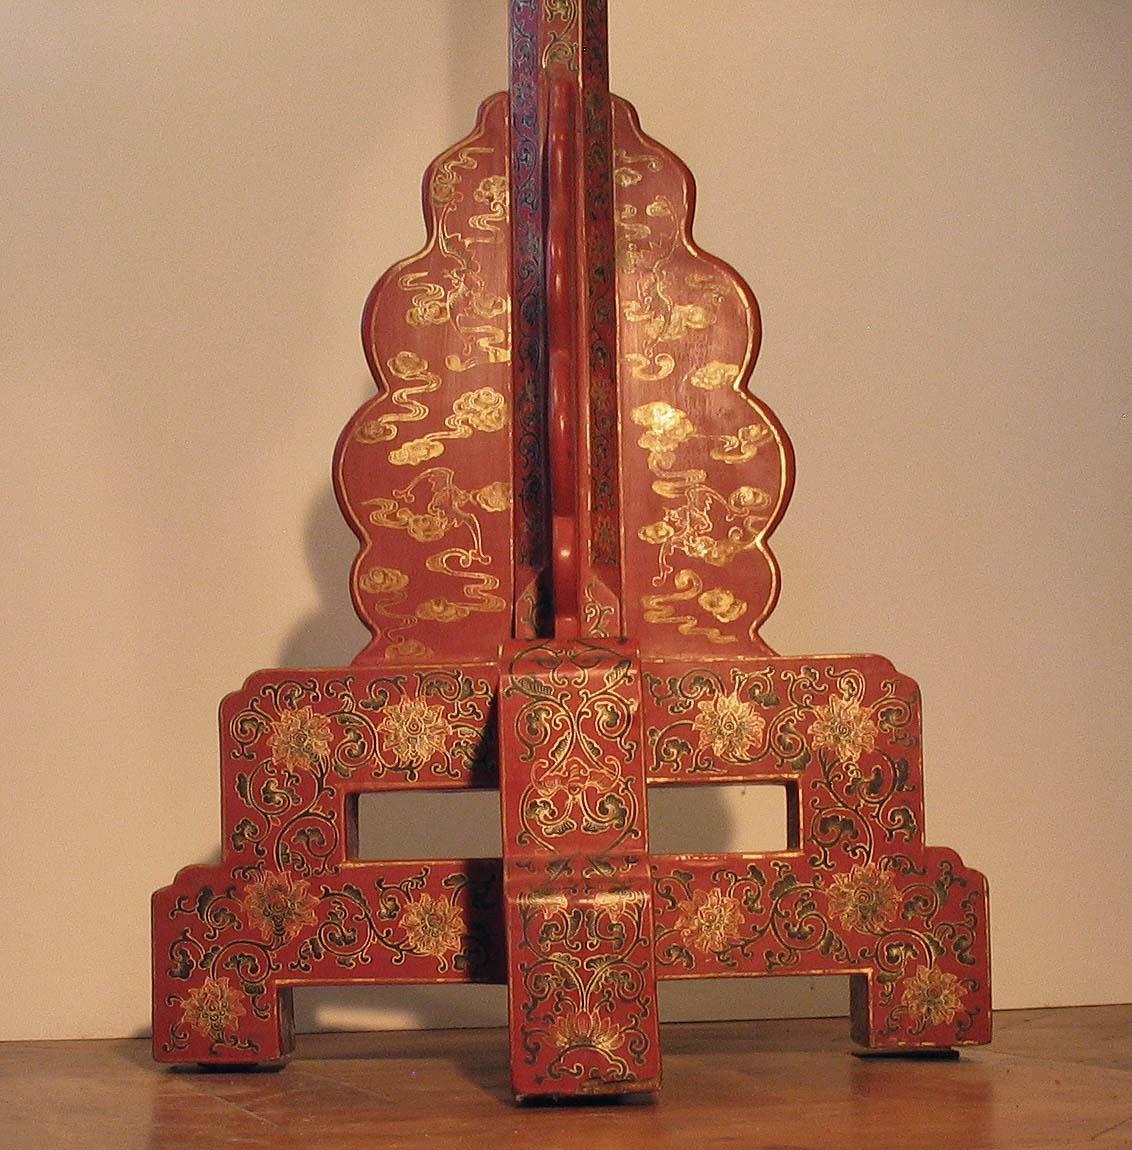 Rare 6 ft. Tall Chinese Ceremonial Lacquer Drum and Stand, 19th Century 1